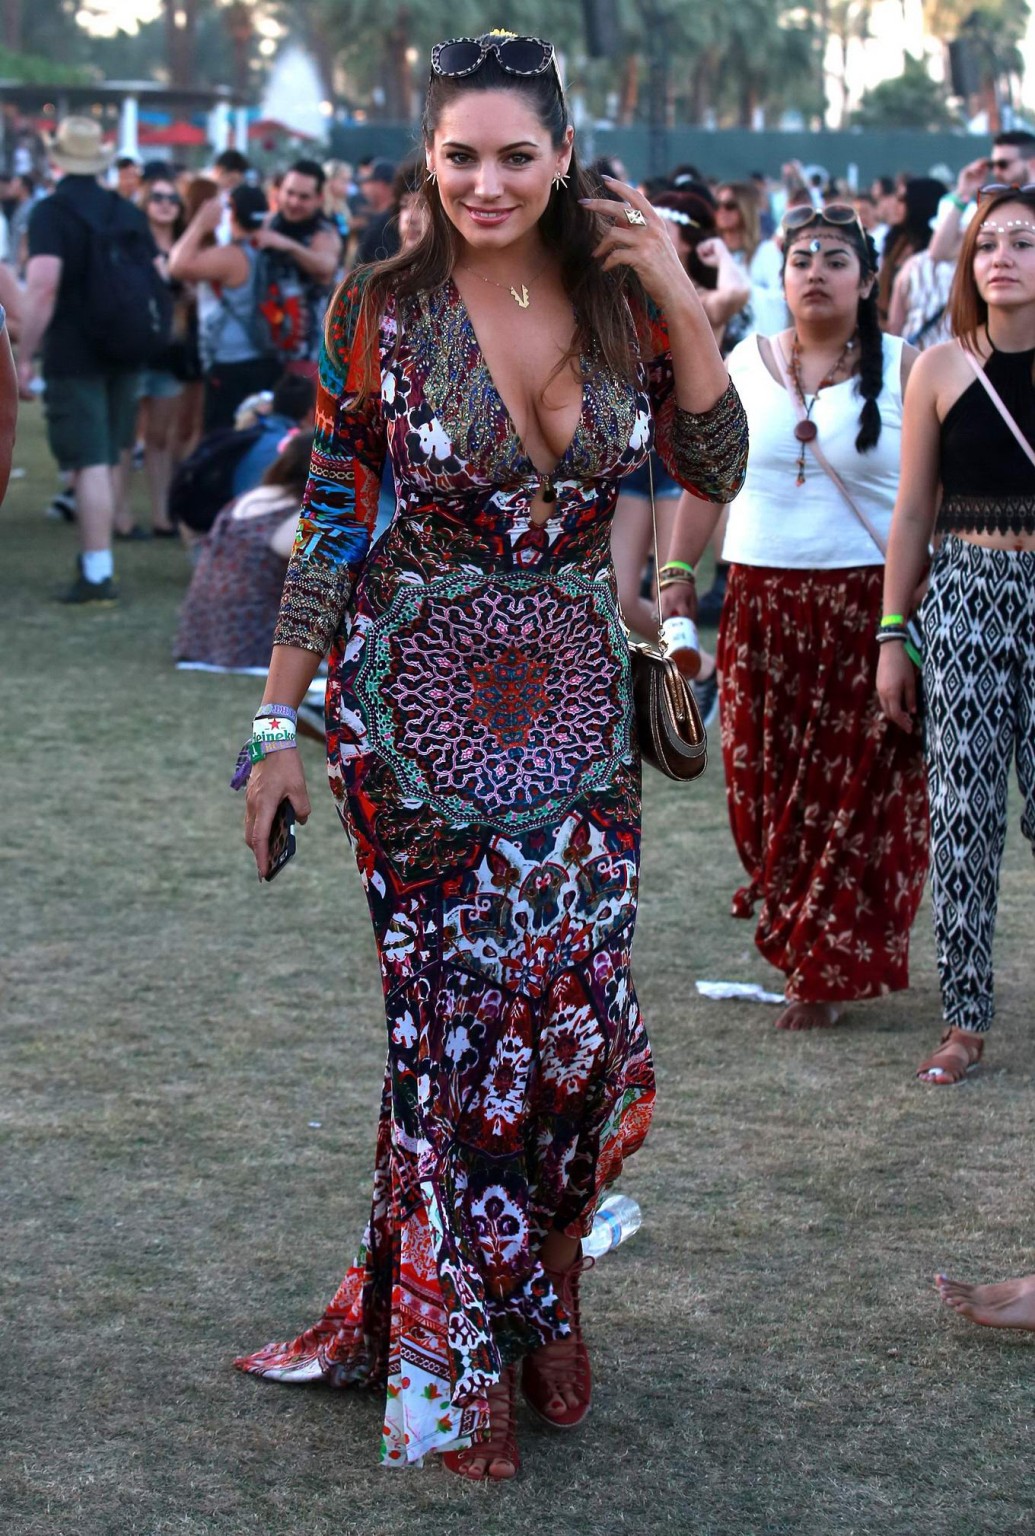 Kelly Brook braless flaunting her melons at Coachella Festival in Indio #75166606